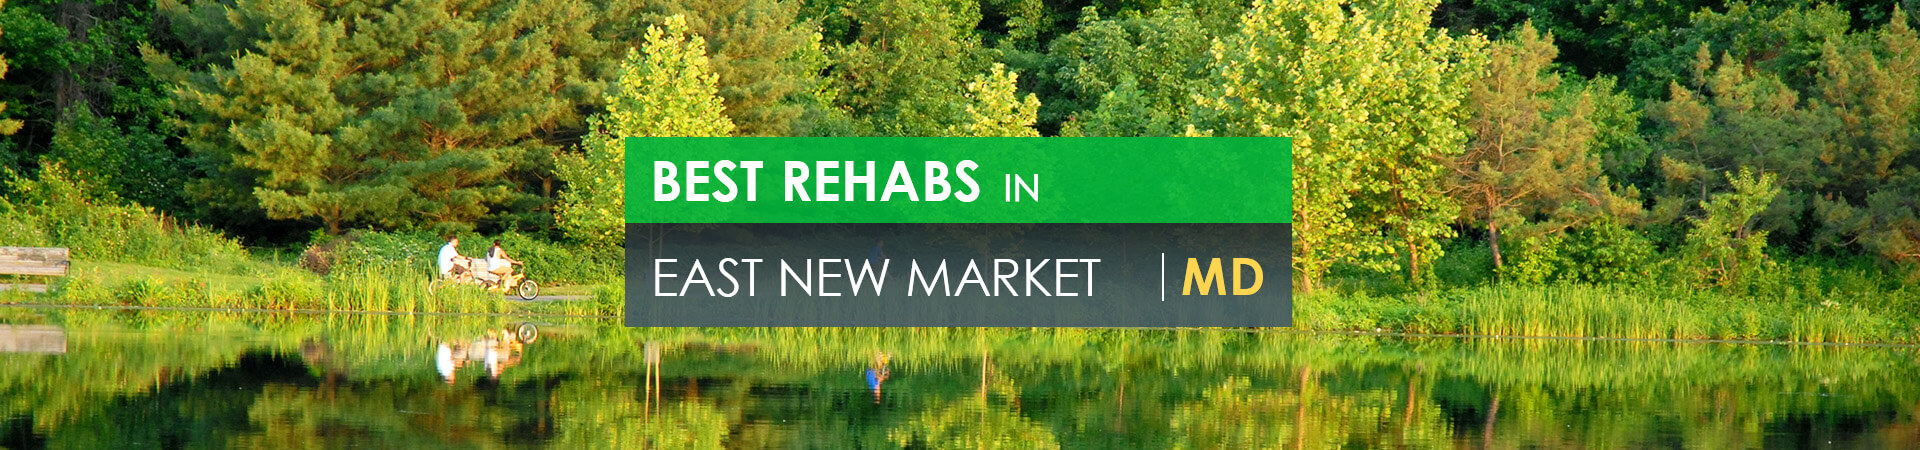 Best rehabs in East New Market, MD